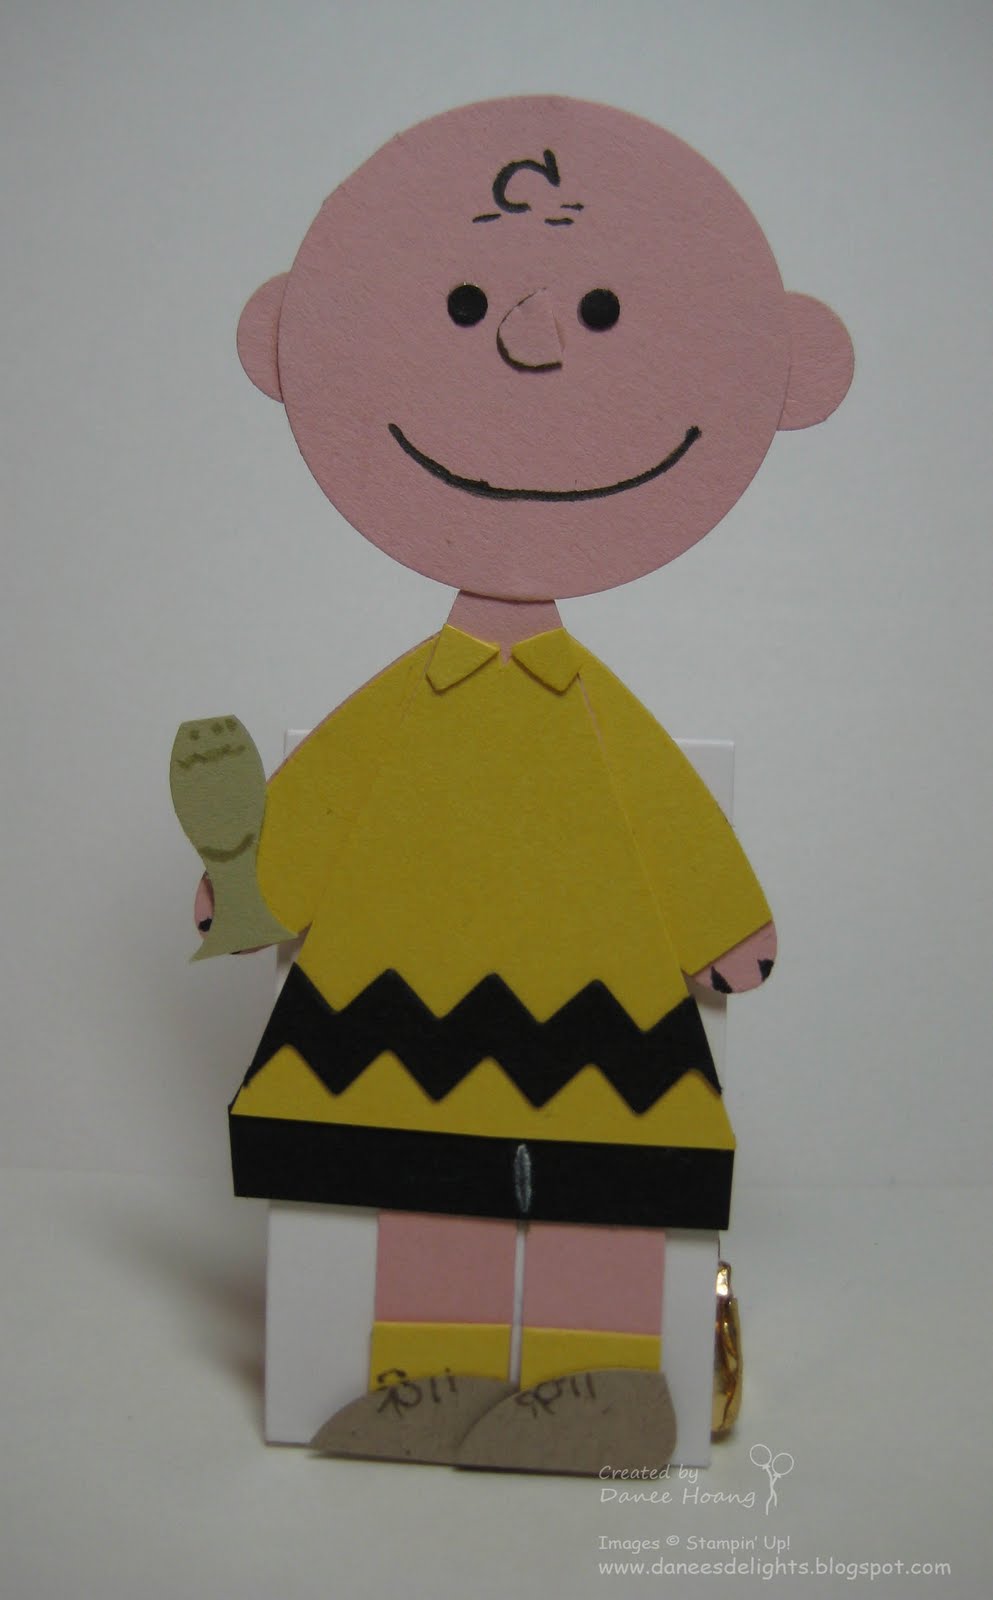 Danee's Stampin' Delights: Happy New Year, Charlie Brown!